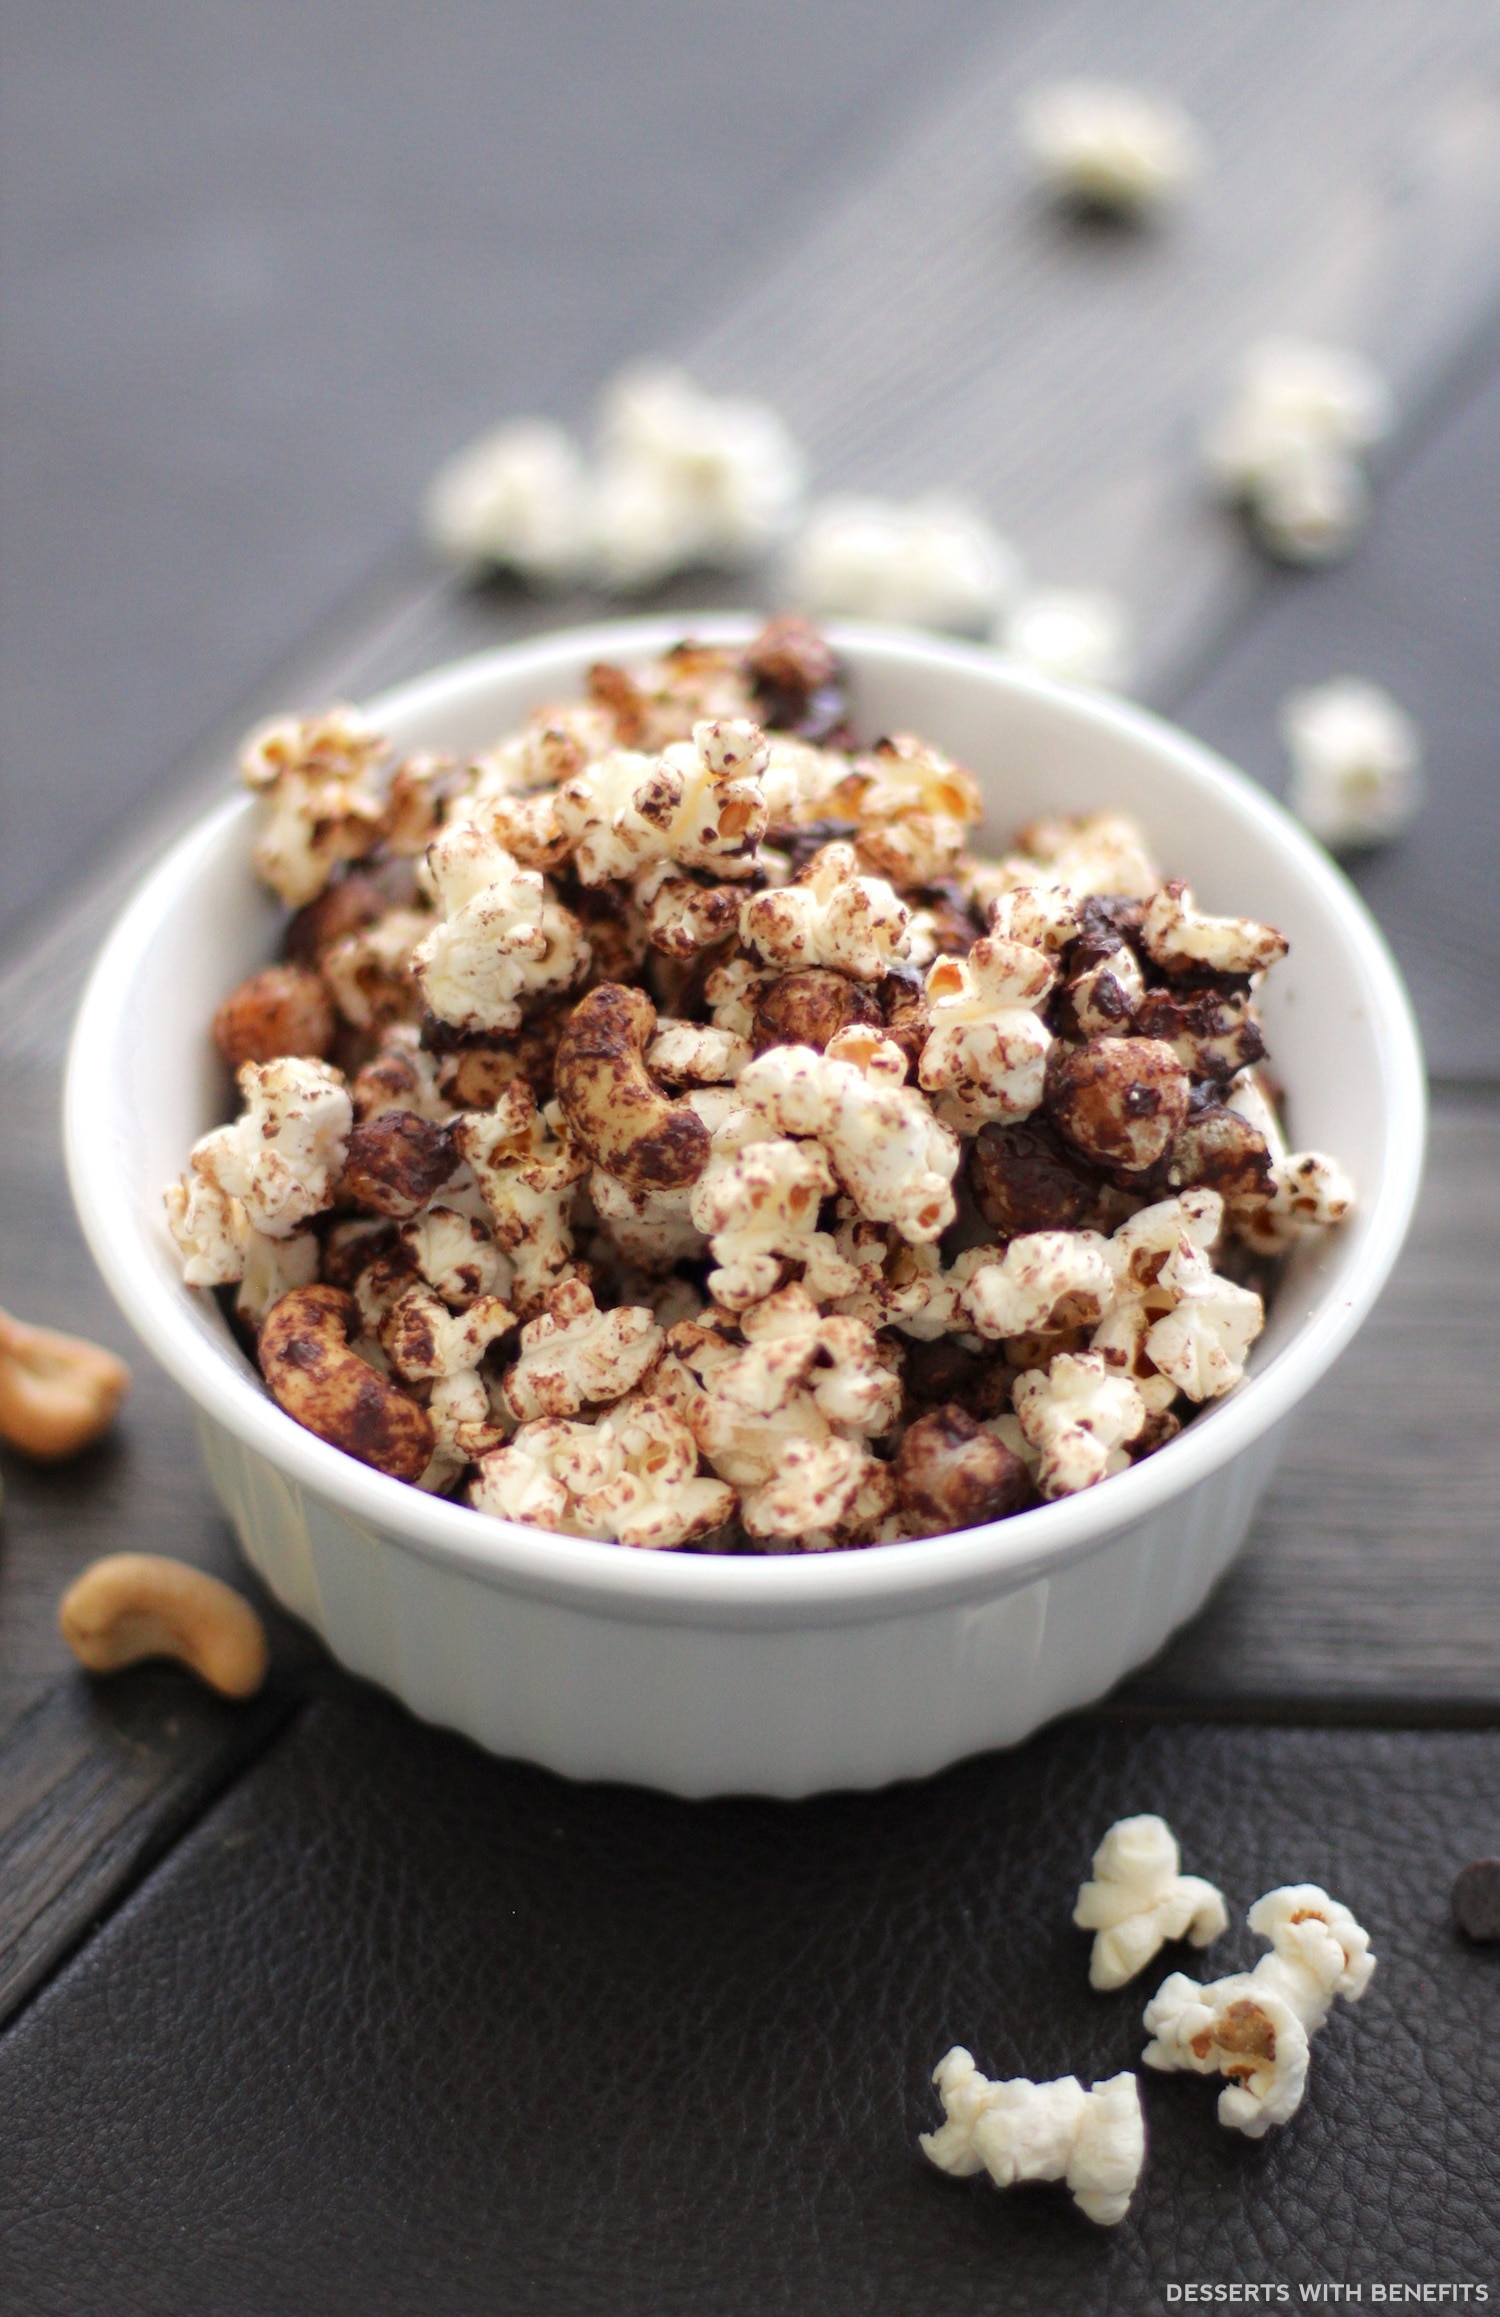 Desserts With Benefits Healthy Chocolate Cashew Popcorn - the Perfect Snack for Game Day! (sugar ...